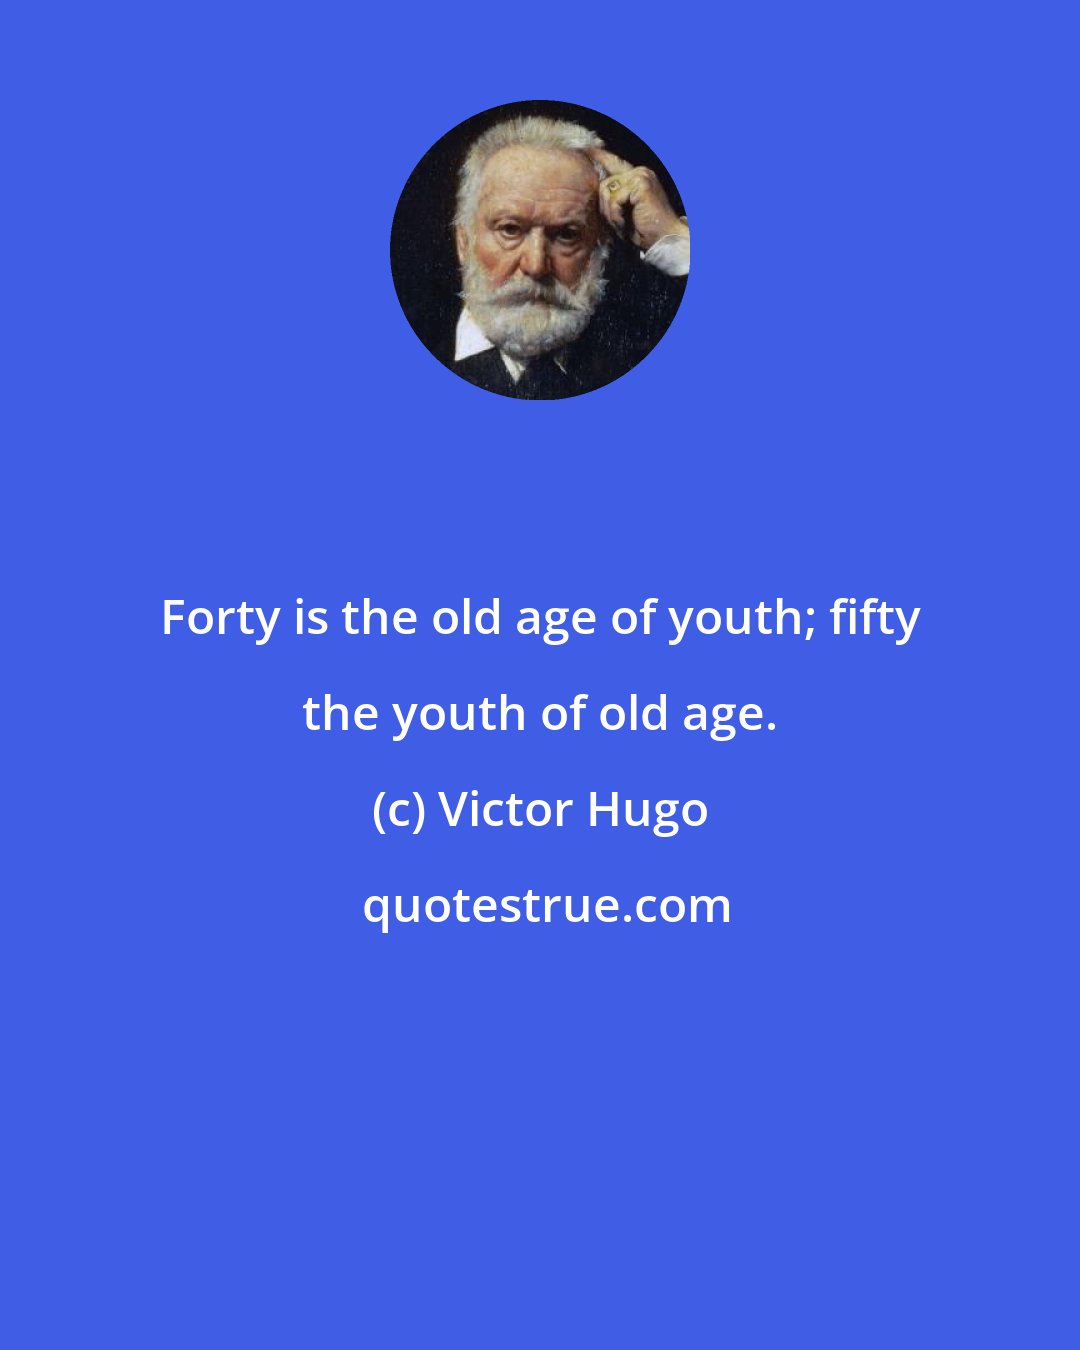 Victor Hugo: Forty is the old age of youth; fifty the youth of old age.